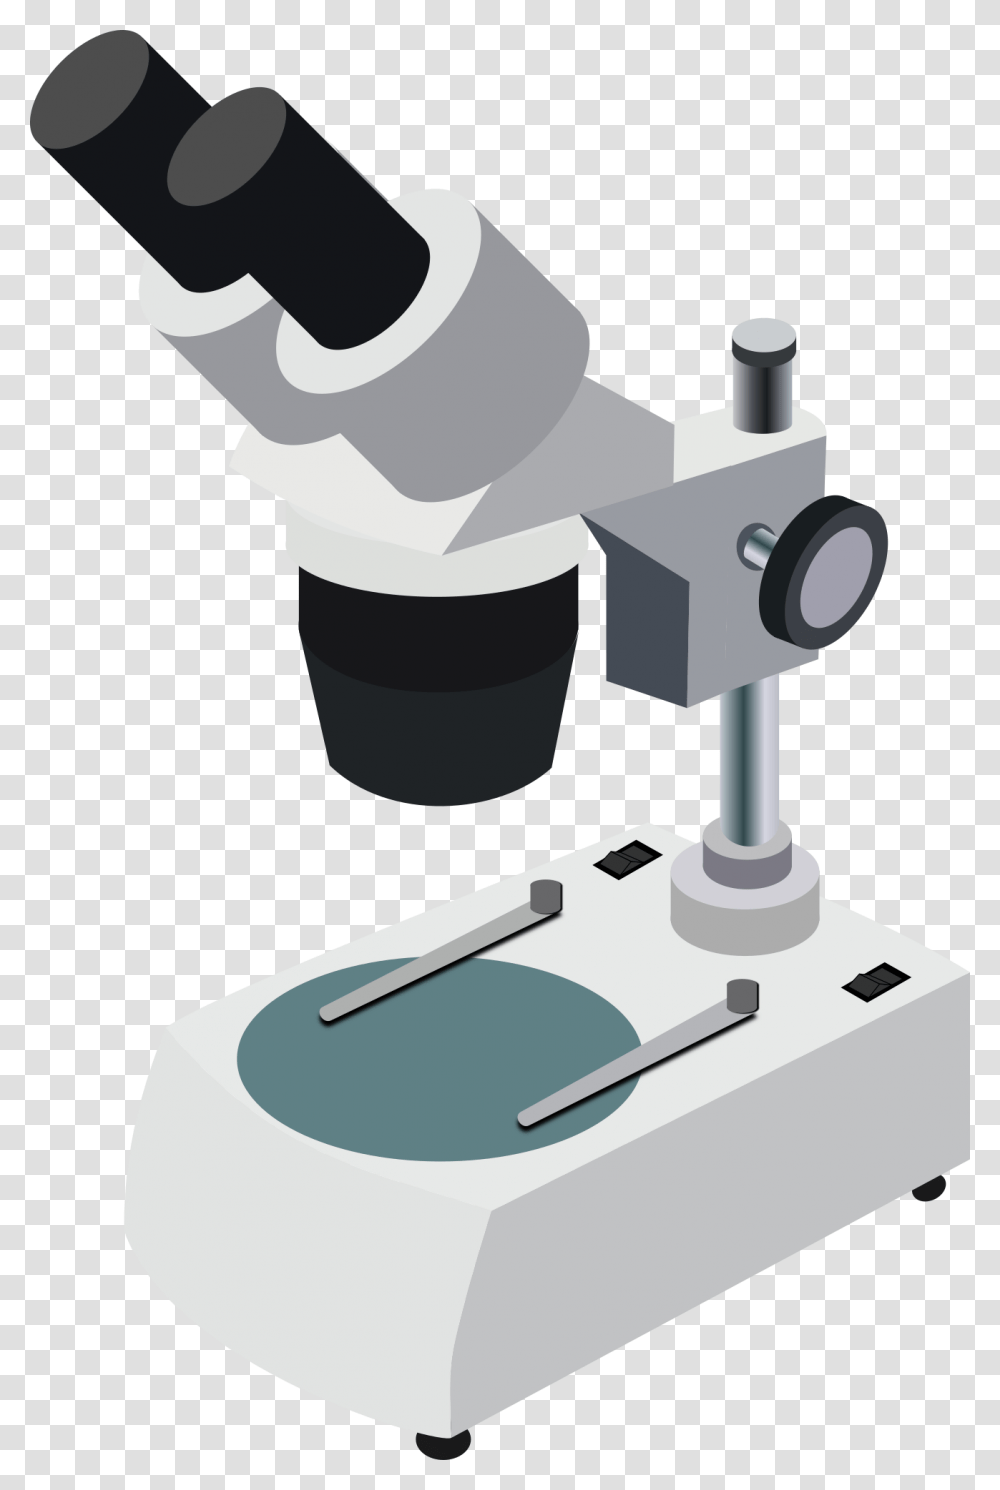 Library Download Microscope Files Microscope Cartoon, Sink Faucet Transparent Png